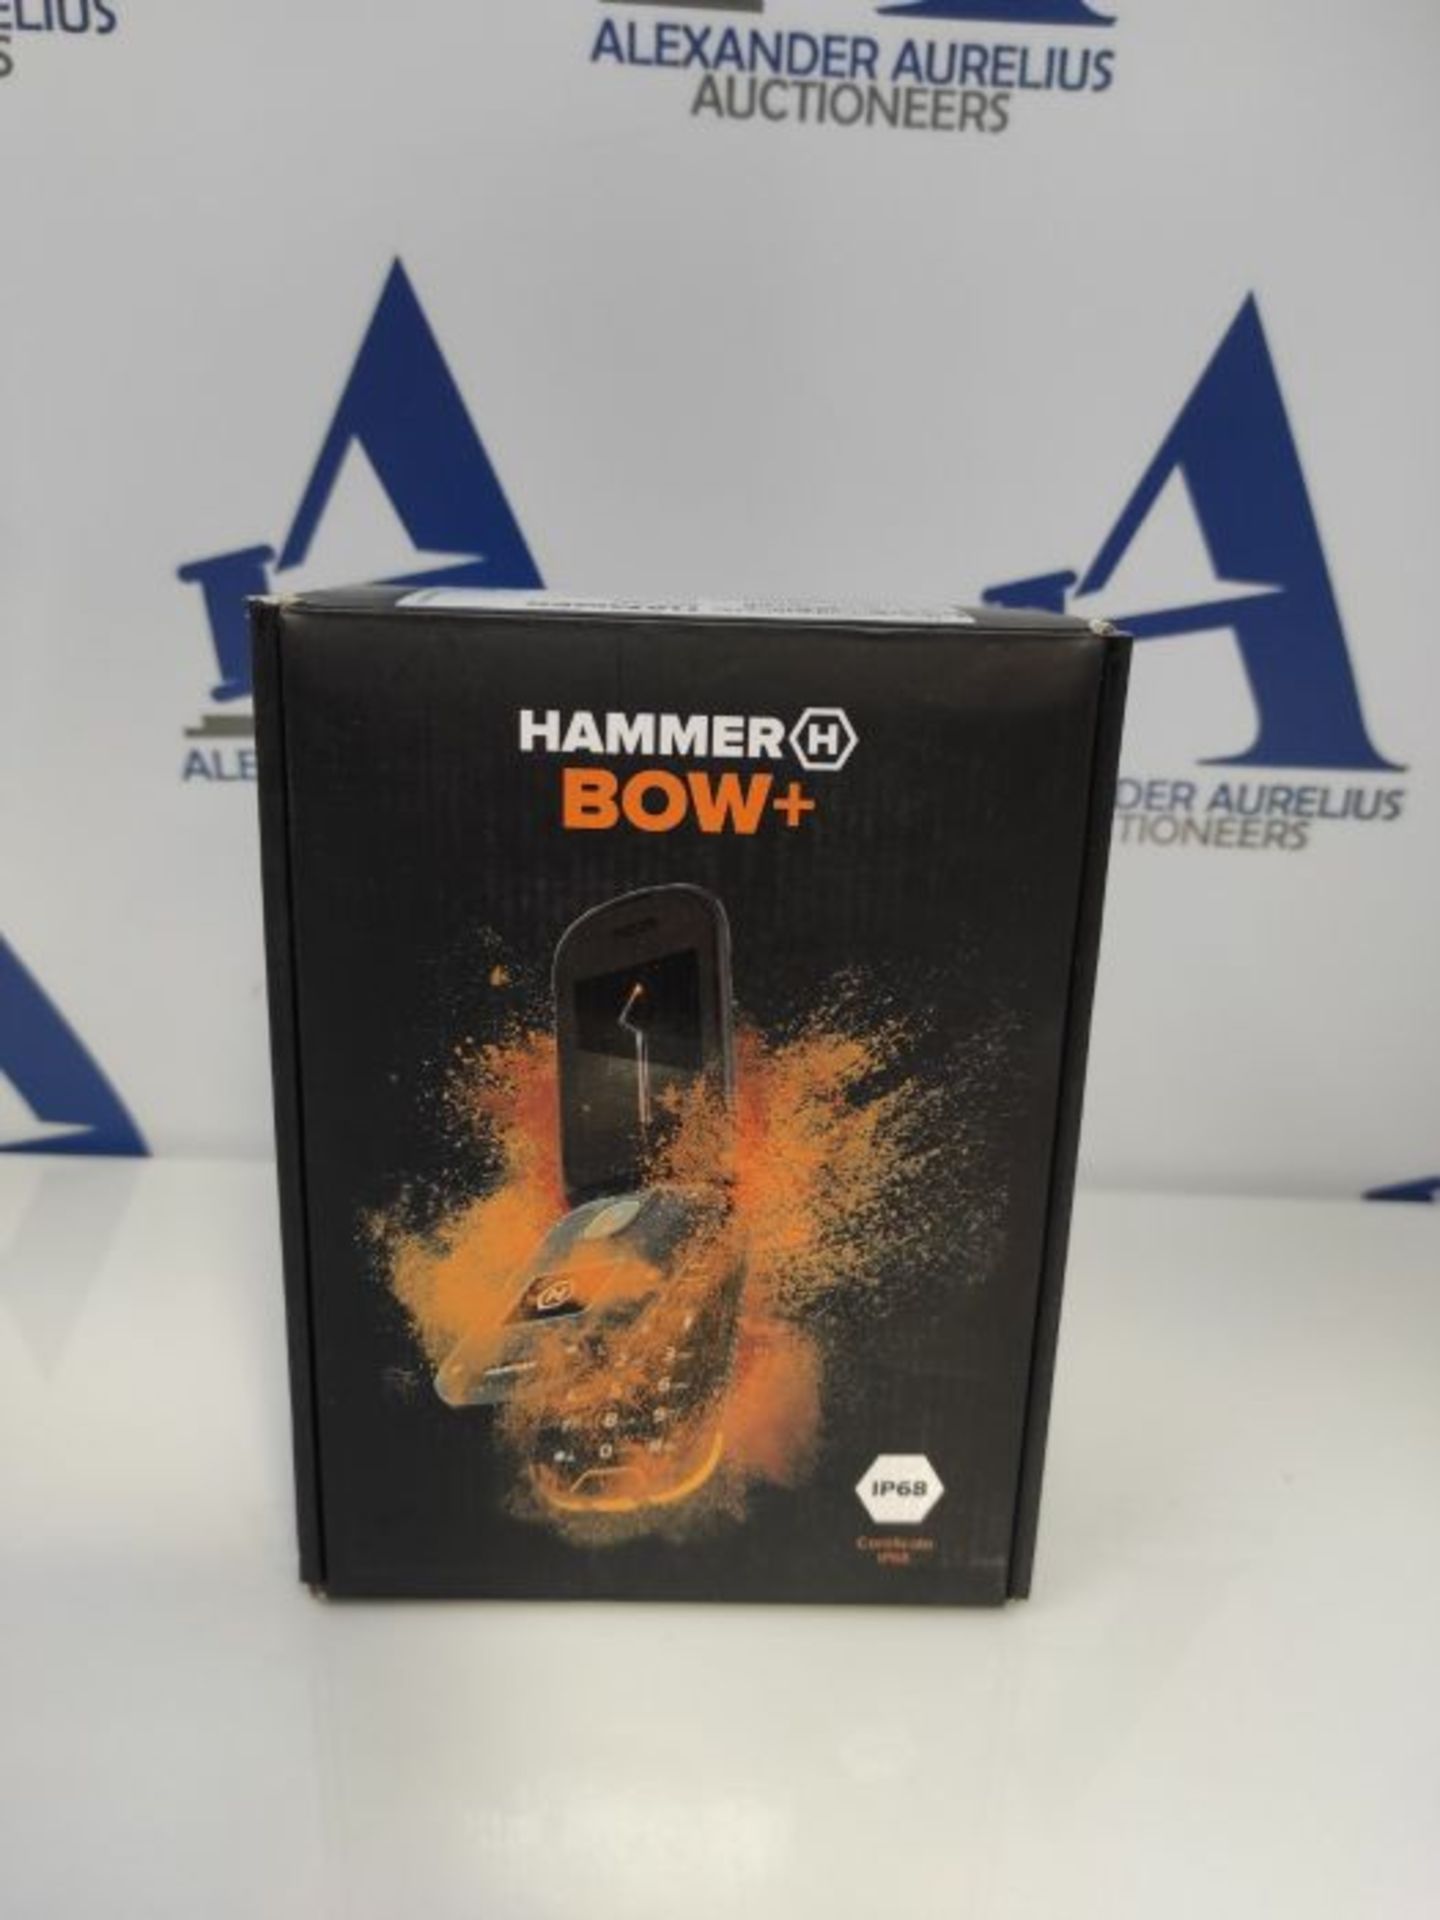 RRP £60.00 Hammer Bow + IP68 2.4 "" & 1.44 "" Two displays, outdoor flip phone with charging stat - Image 2 of 3